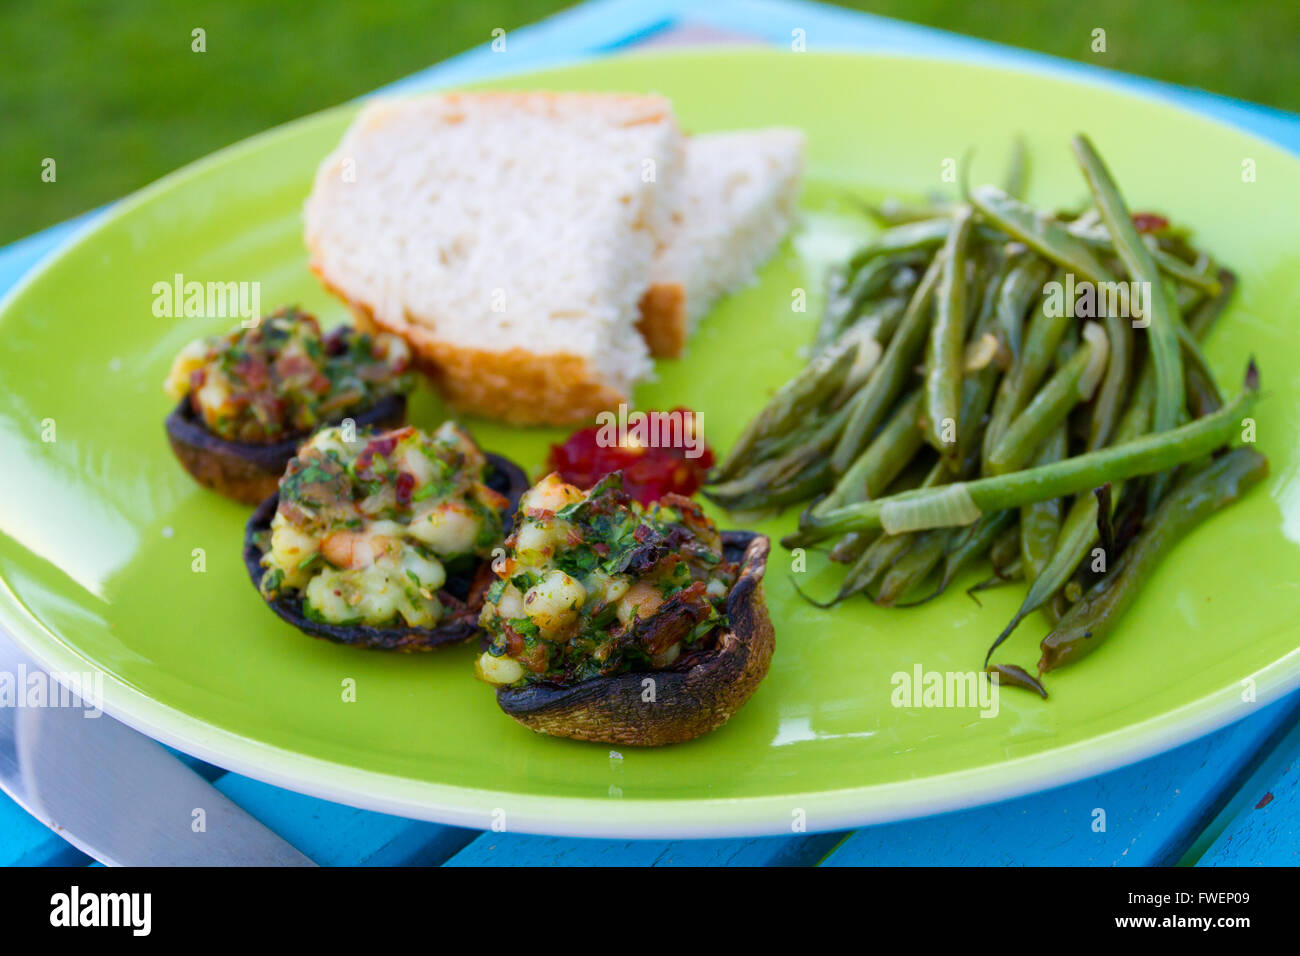 This gourmet meal of stuffed mushrooms and green beans served on a green plate with some white bread. This is dinner but the ima Stock Photo